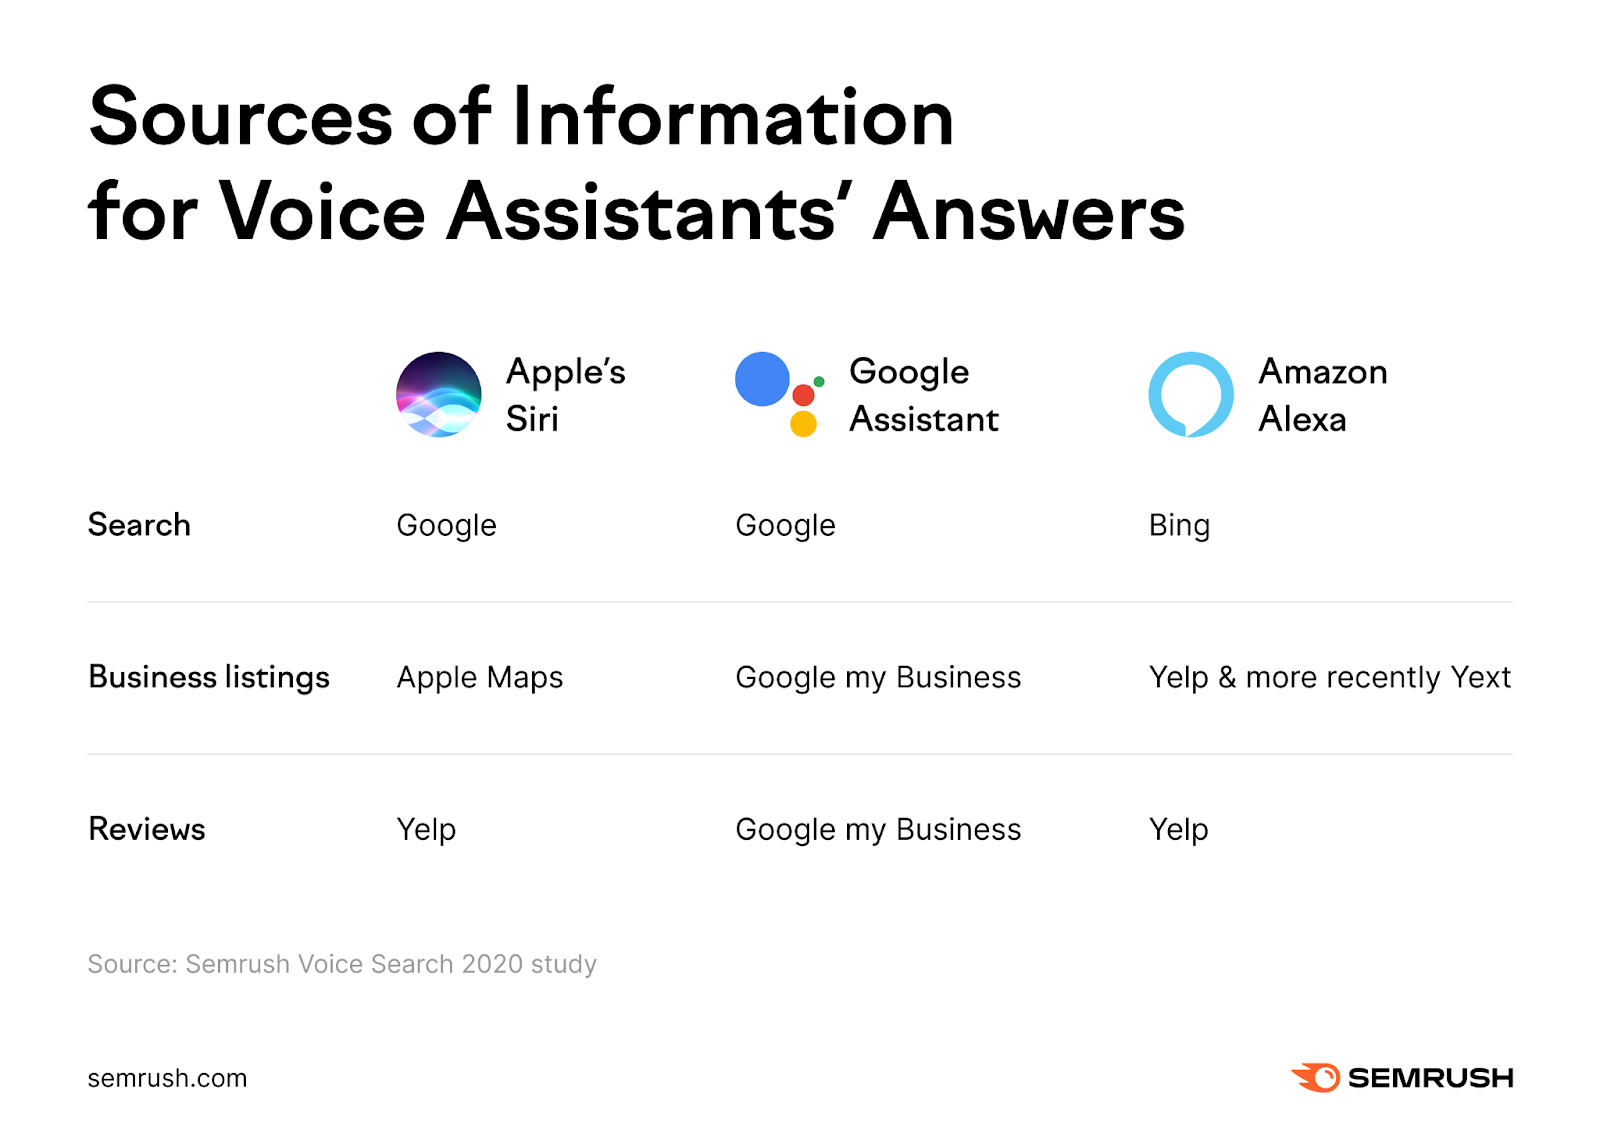 An infographic by Semrush listing sources of information for voice assistant's answers